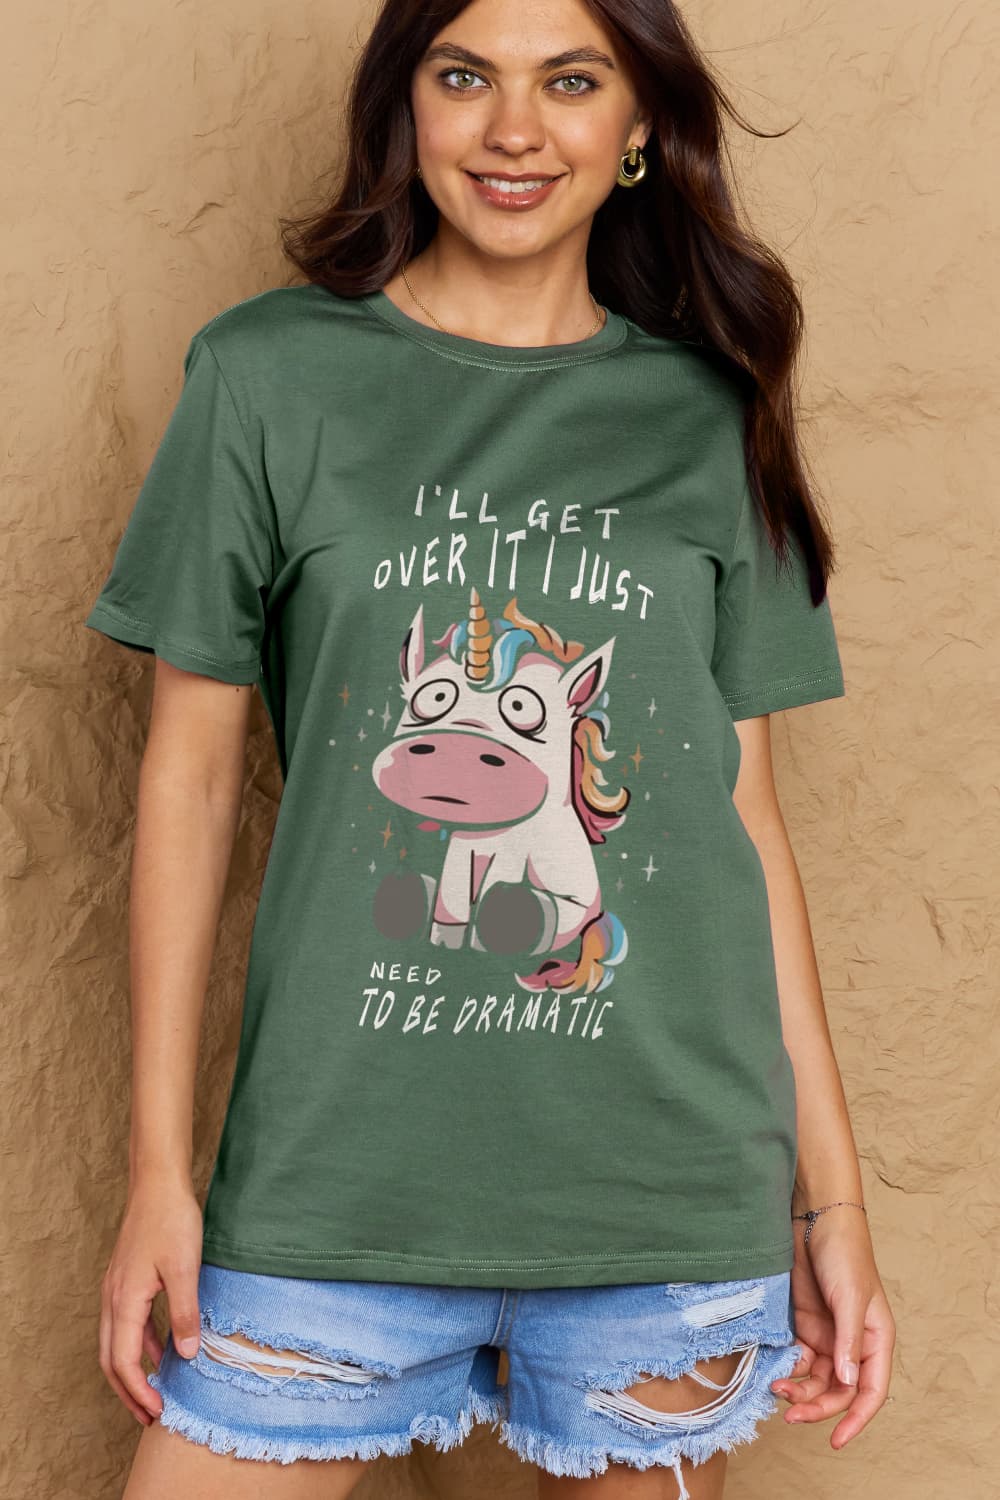 Full Size I’LL GET OVER IT I JUST NEED TO BE DRAMATIC Graphic Cotton Tee - T-Shirts - Shirts & Tops - 13 - 2024